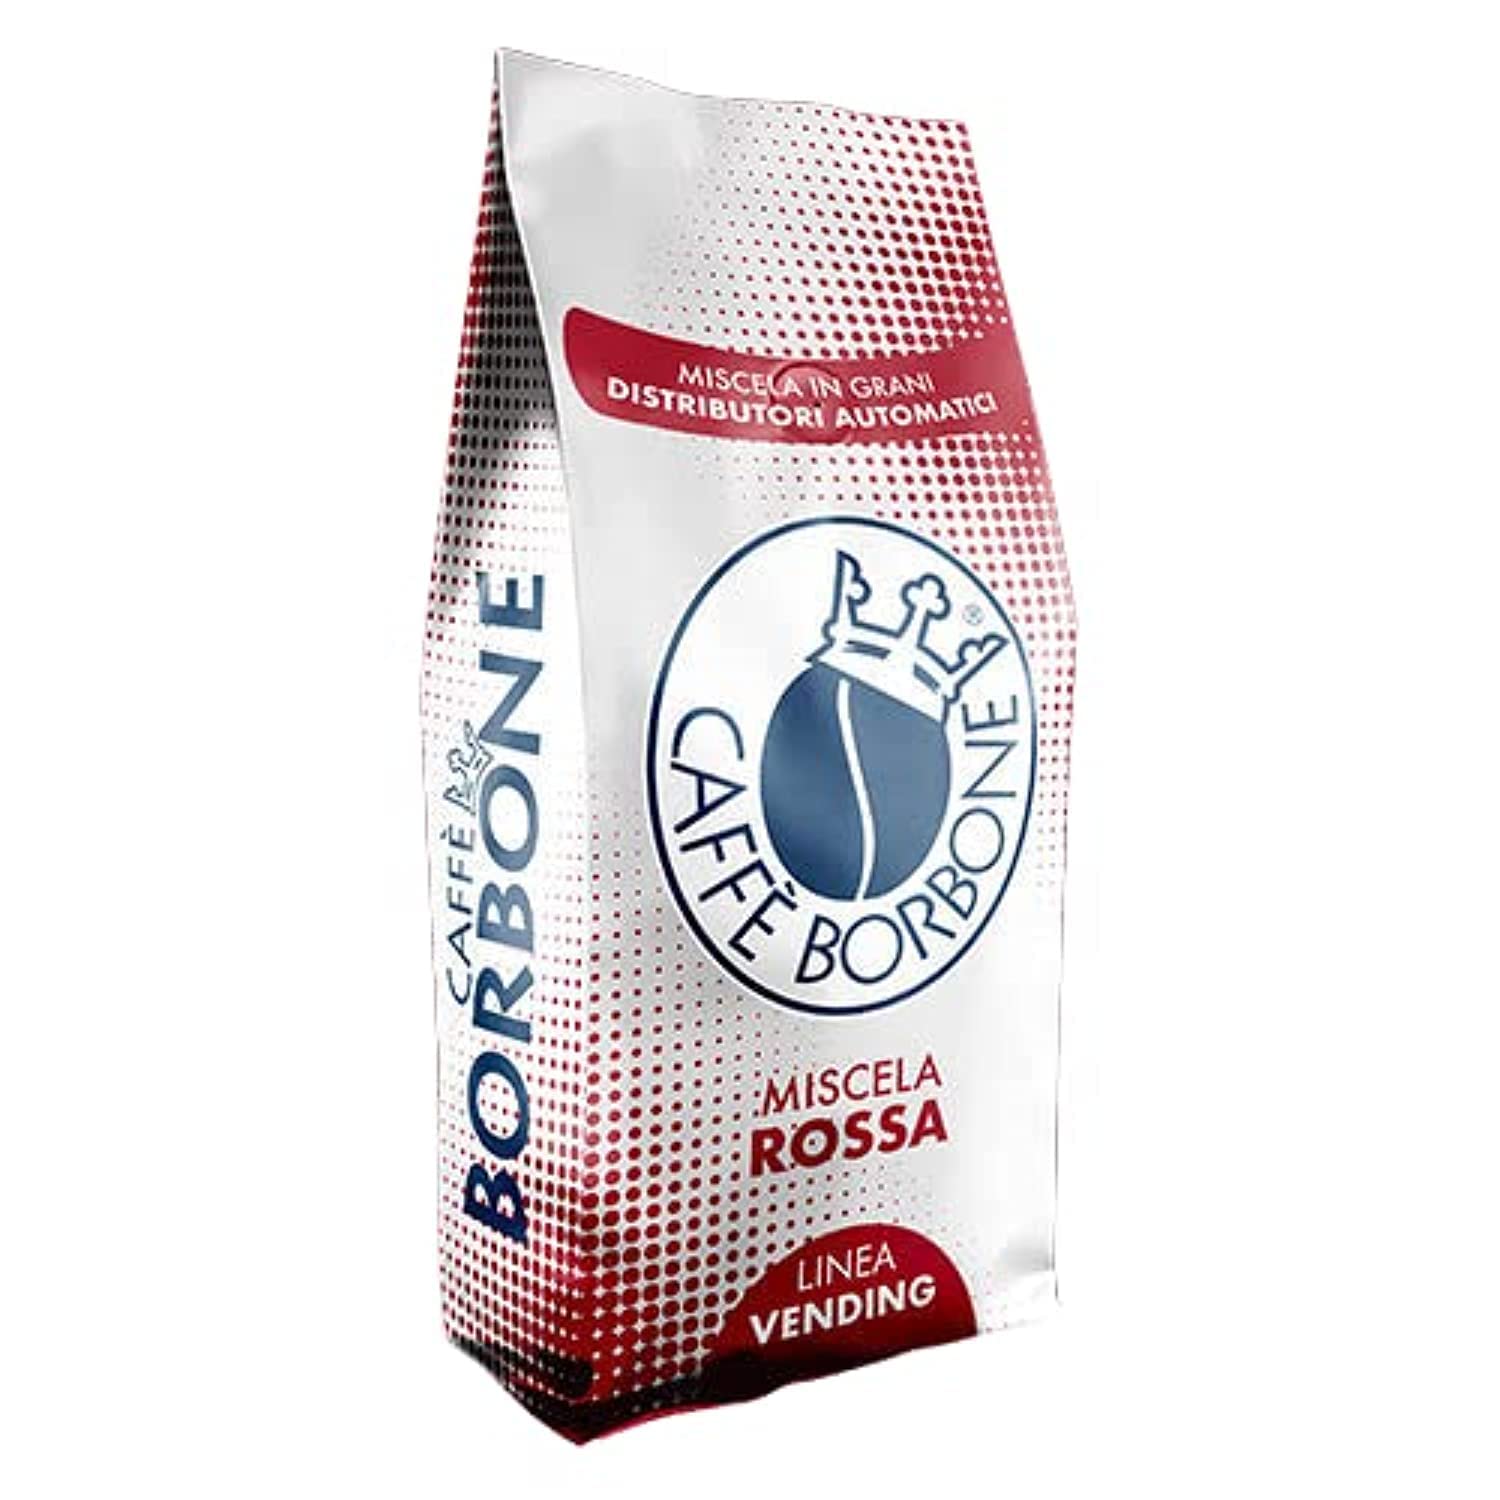 Caffe Borbone Espresso Beans – Whole Italian Coffee Beans – Miscela Rossa - Intensity 9.5/10 Full-Bodied and Bold – Made in Italy